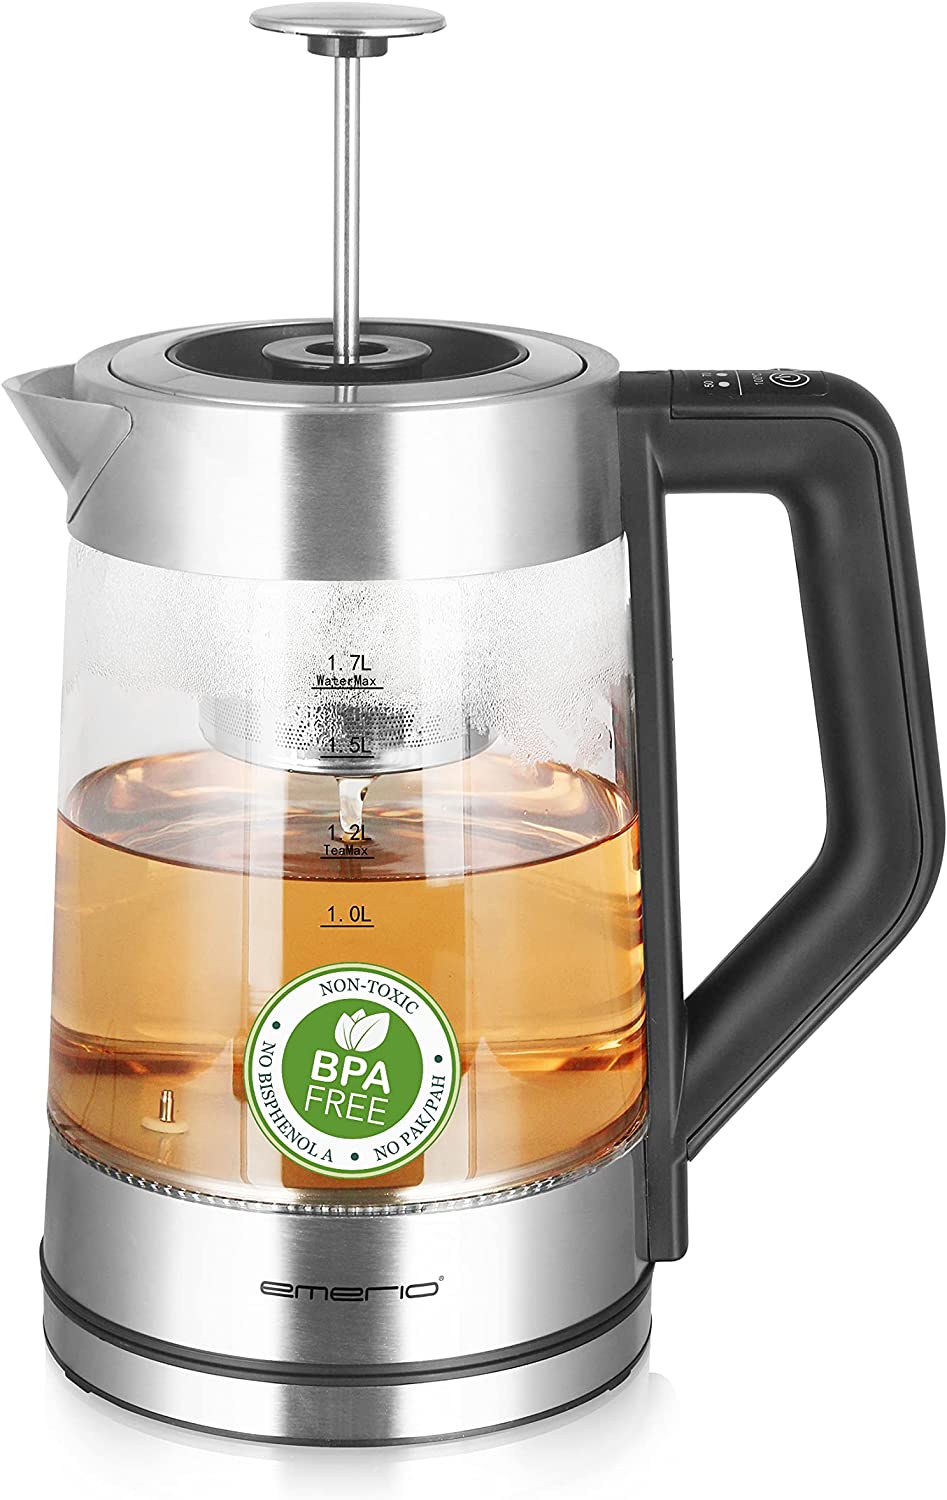 Emerio WK-122730 Glass Tea Maker with Temperature Selection [50 / 70 / 80 / 90 / 100 °C], Kettle, Manual Tea Strainer Made of Stainless Steel, Removable, Borosilicate Glass, BPA Free, 1.7 L Volume, 222000 Watt, Silver